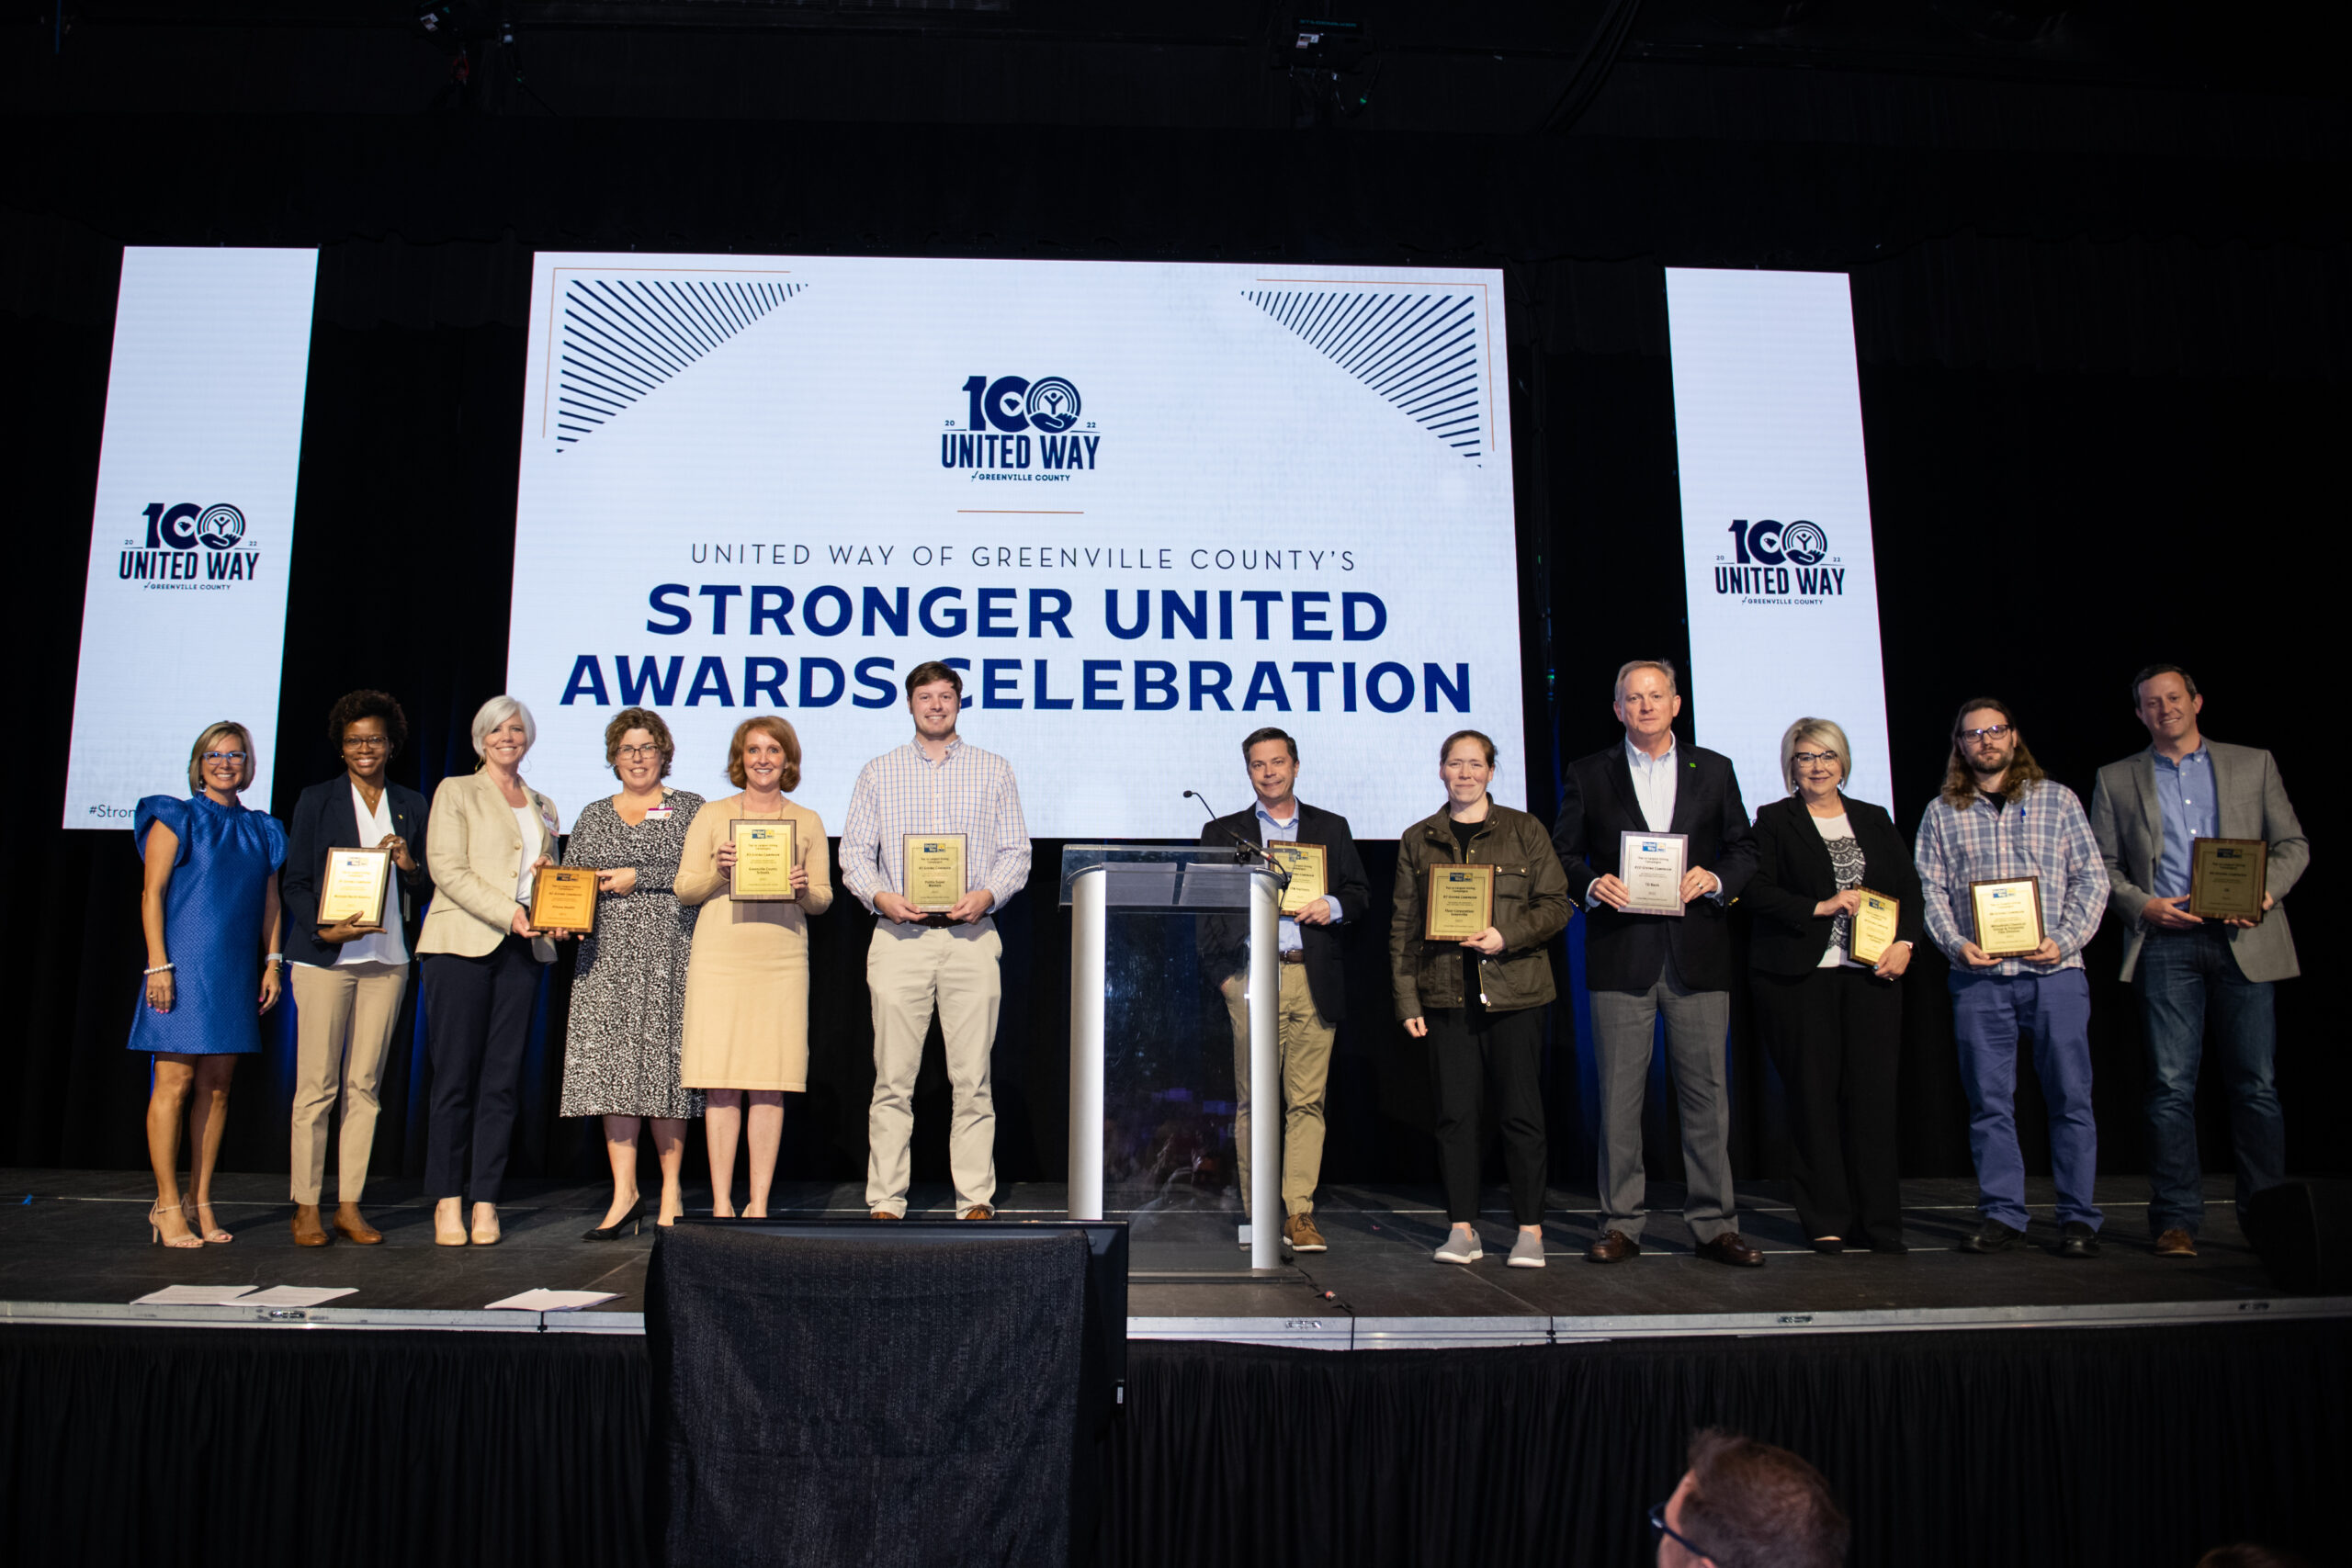 United Way celebrates a century of service, the impact made possible by supporters